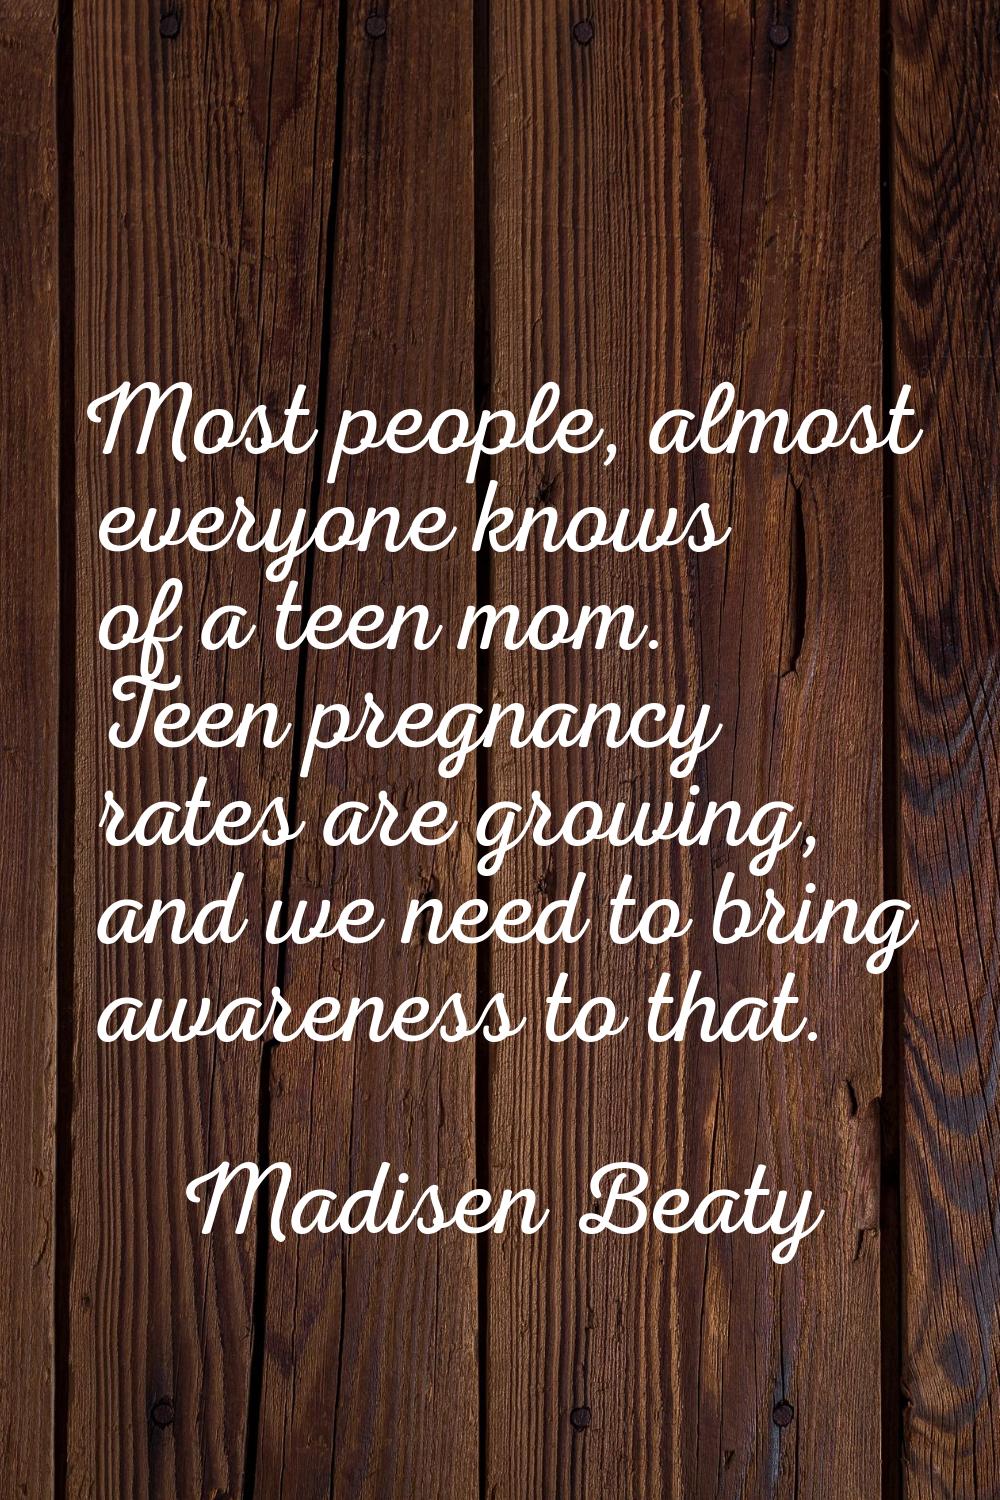 Most people, almost everyone knows of a teen mom. Teen pregnancy rates are growing, and we need to 